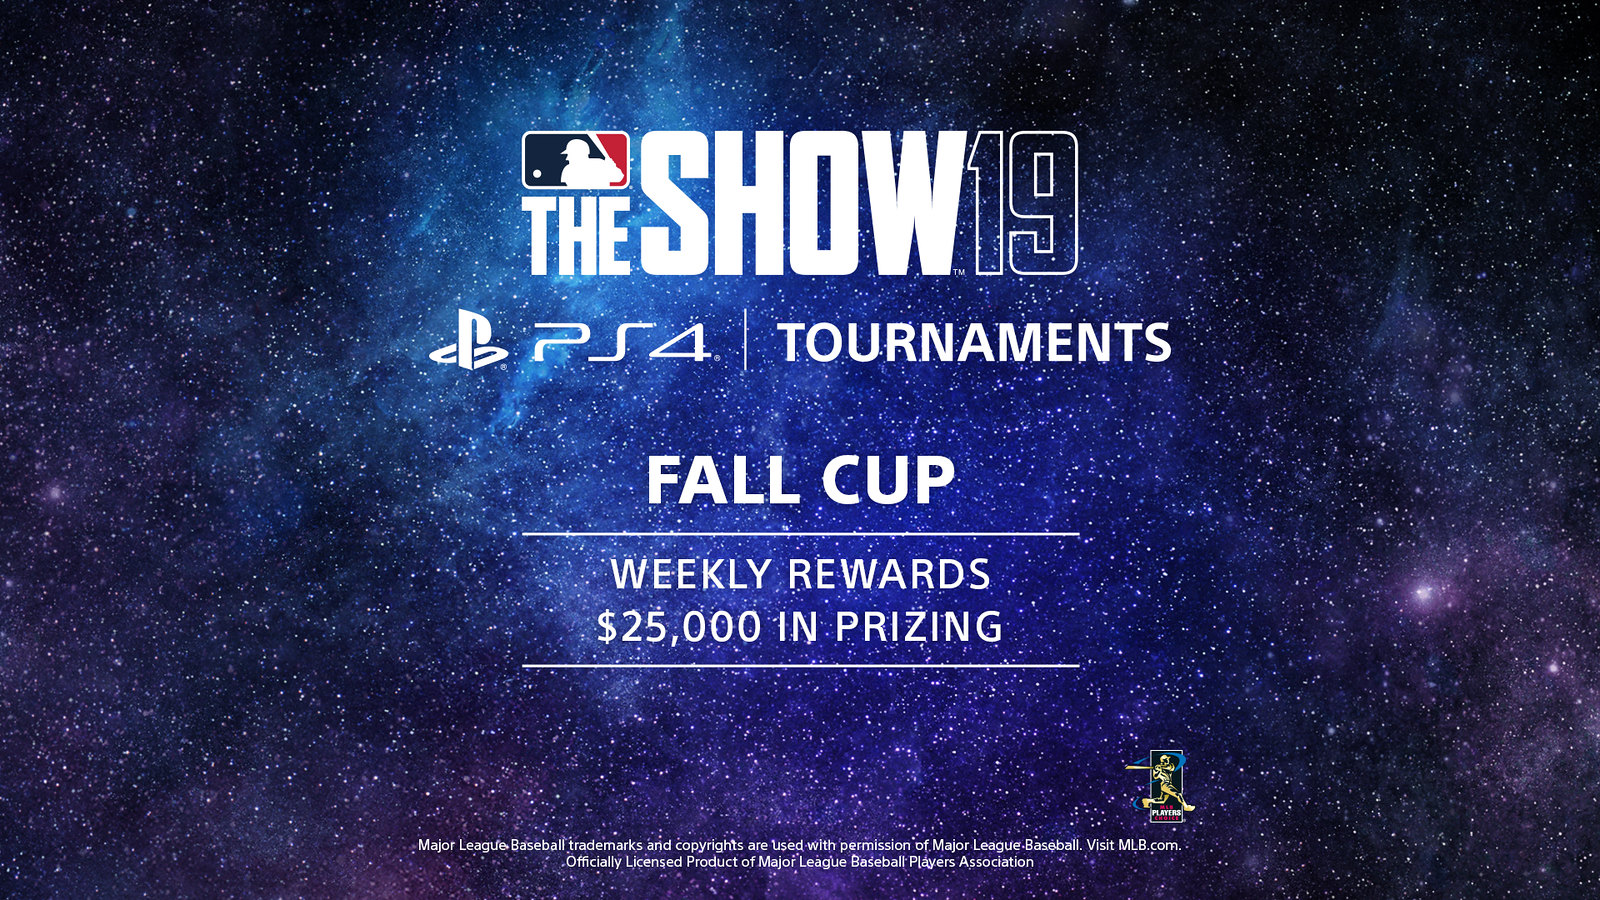 MLB The Show 19 PS4 Tournaments